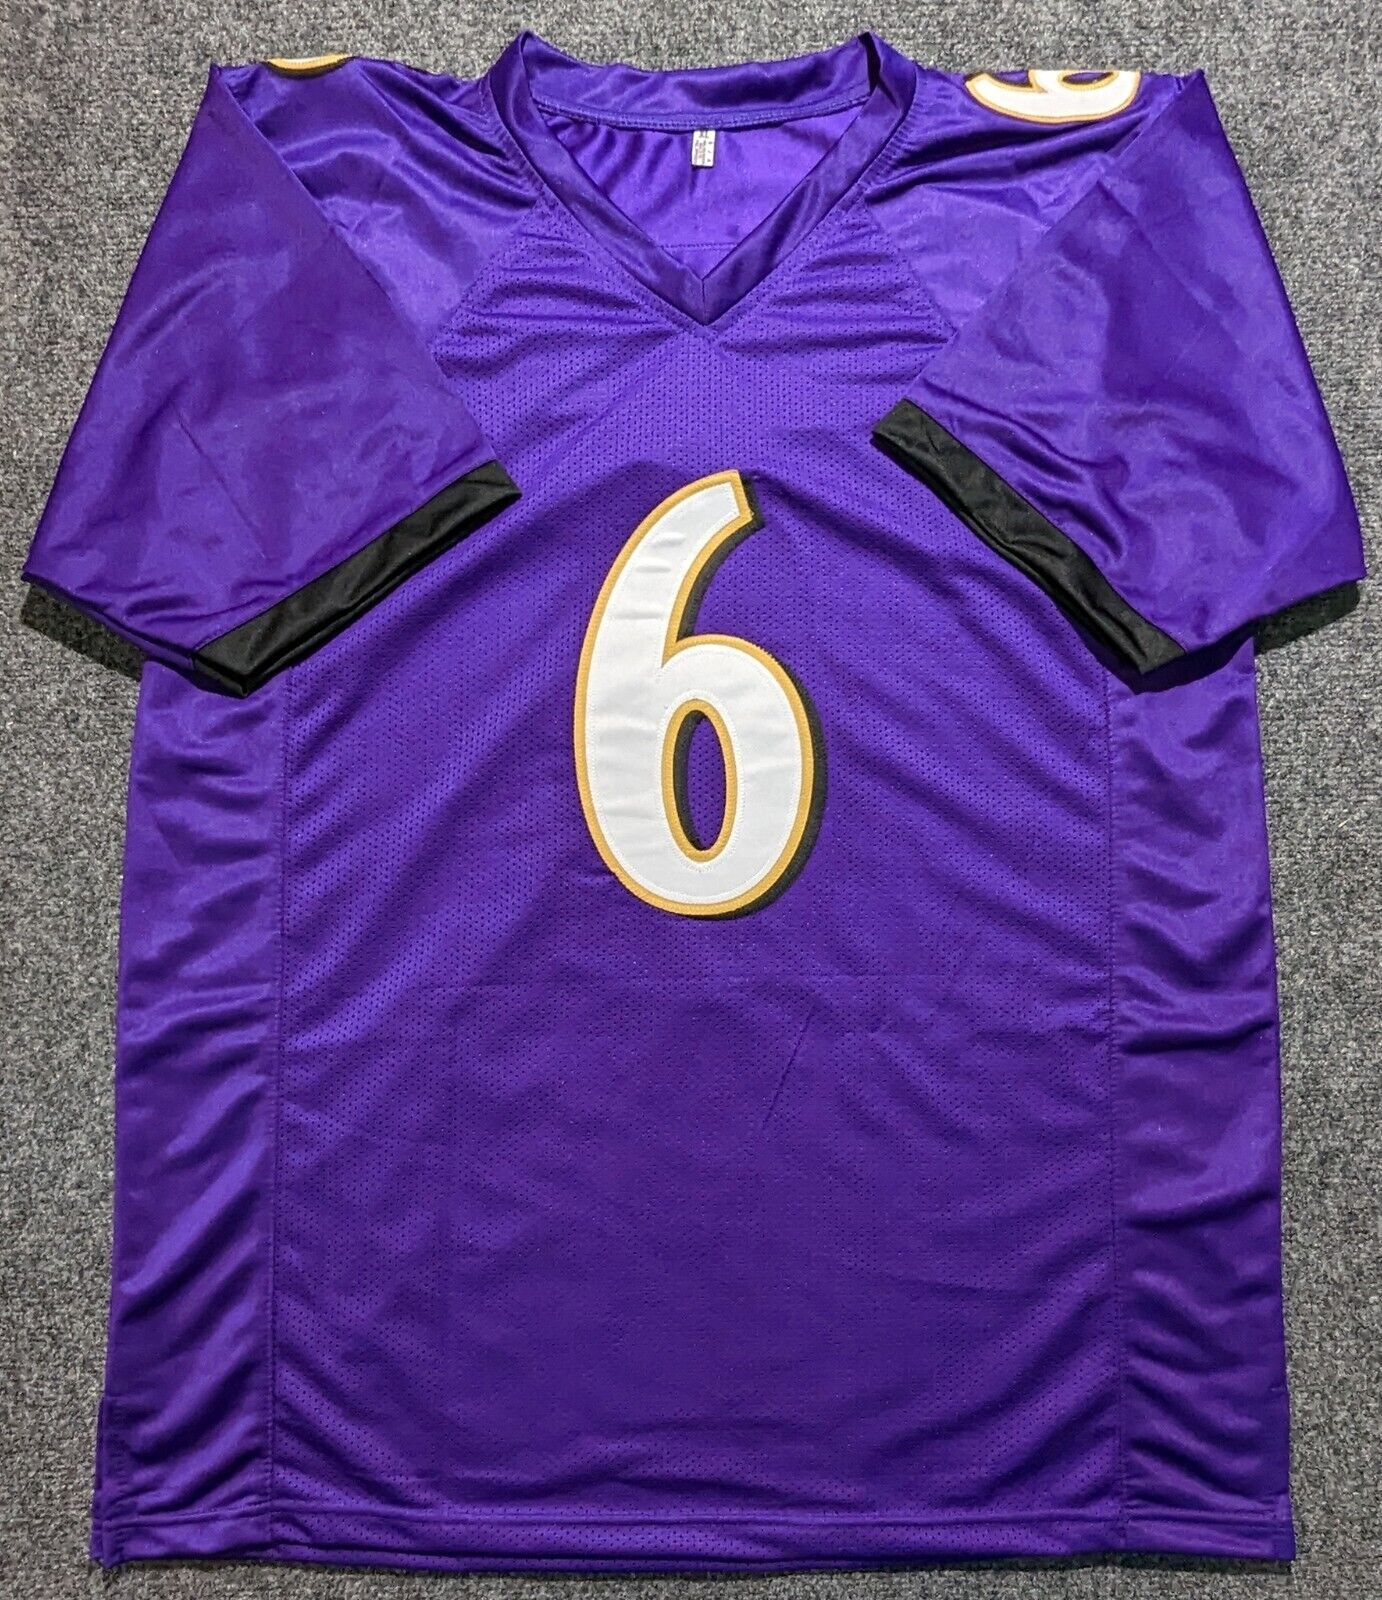 MVP Authentics Baltimore Ravens Patrick Queen Autographed Signed Jersey Jsa Coa 90 sports jersey framing , jersey framing